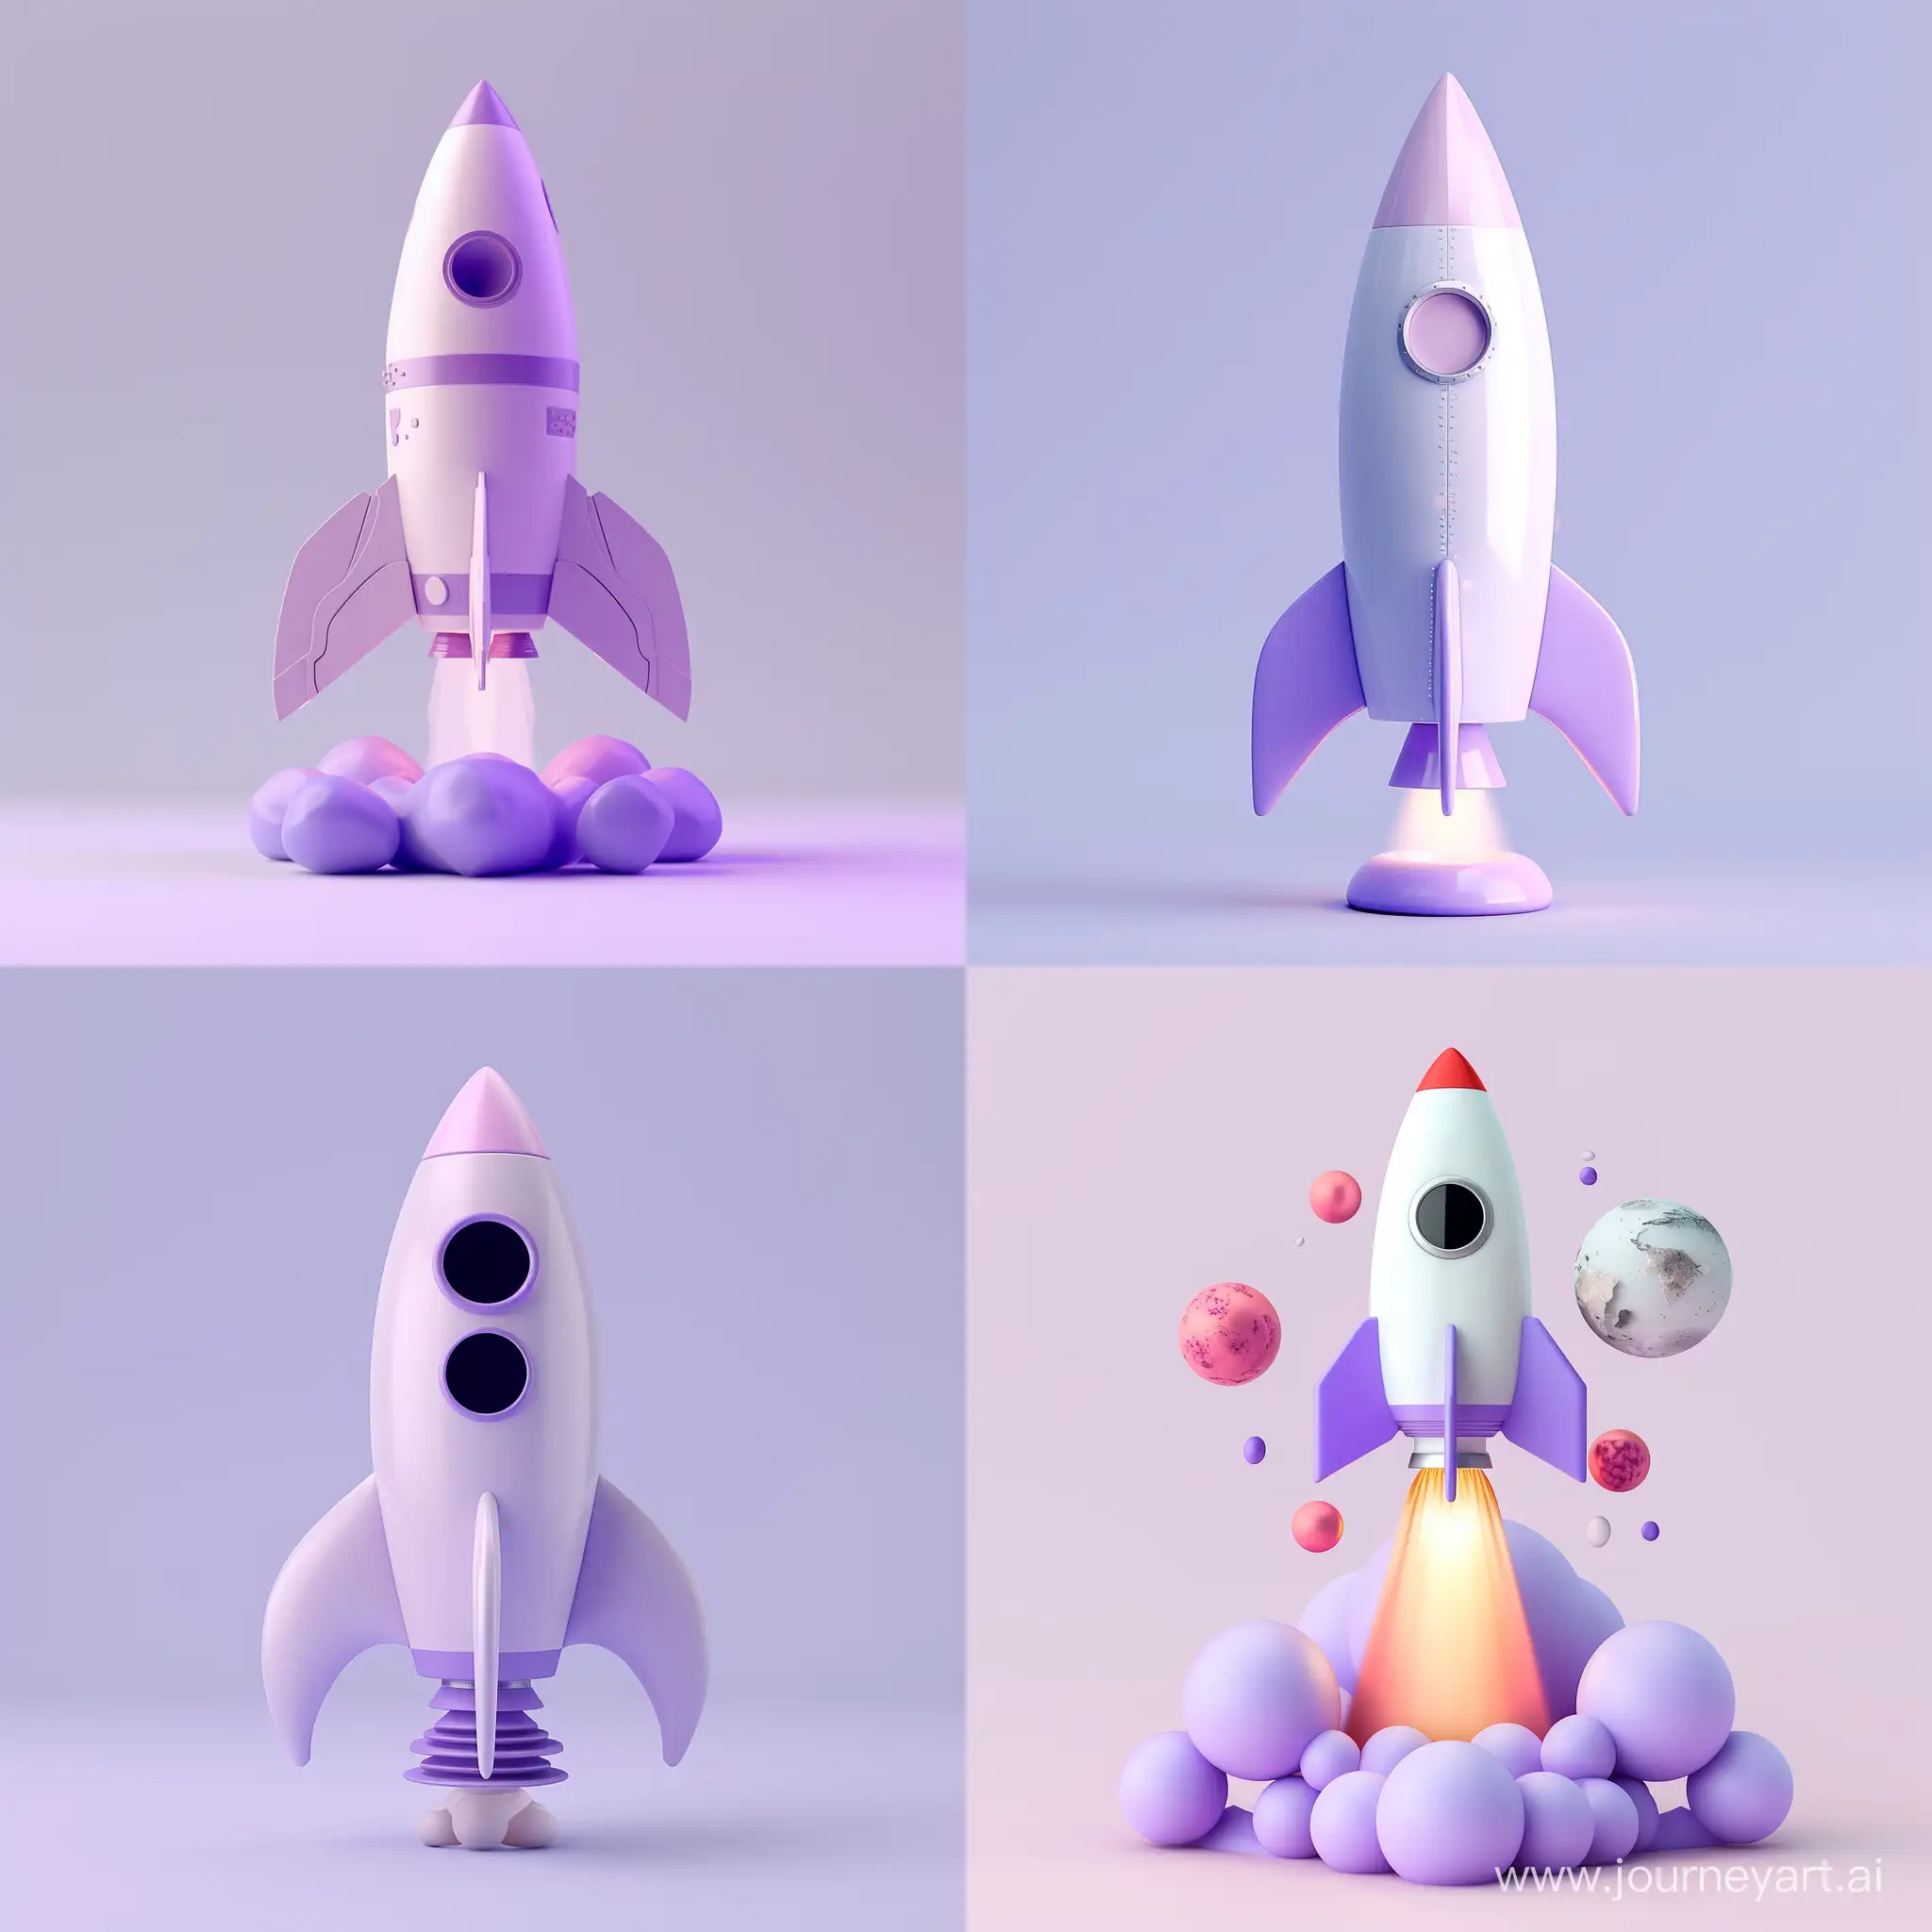 Calm-State-Rocket-Science-in-Pastel-Colors-3D-Illustration